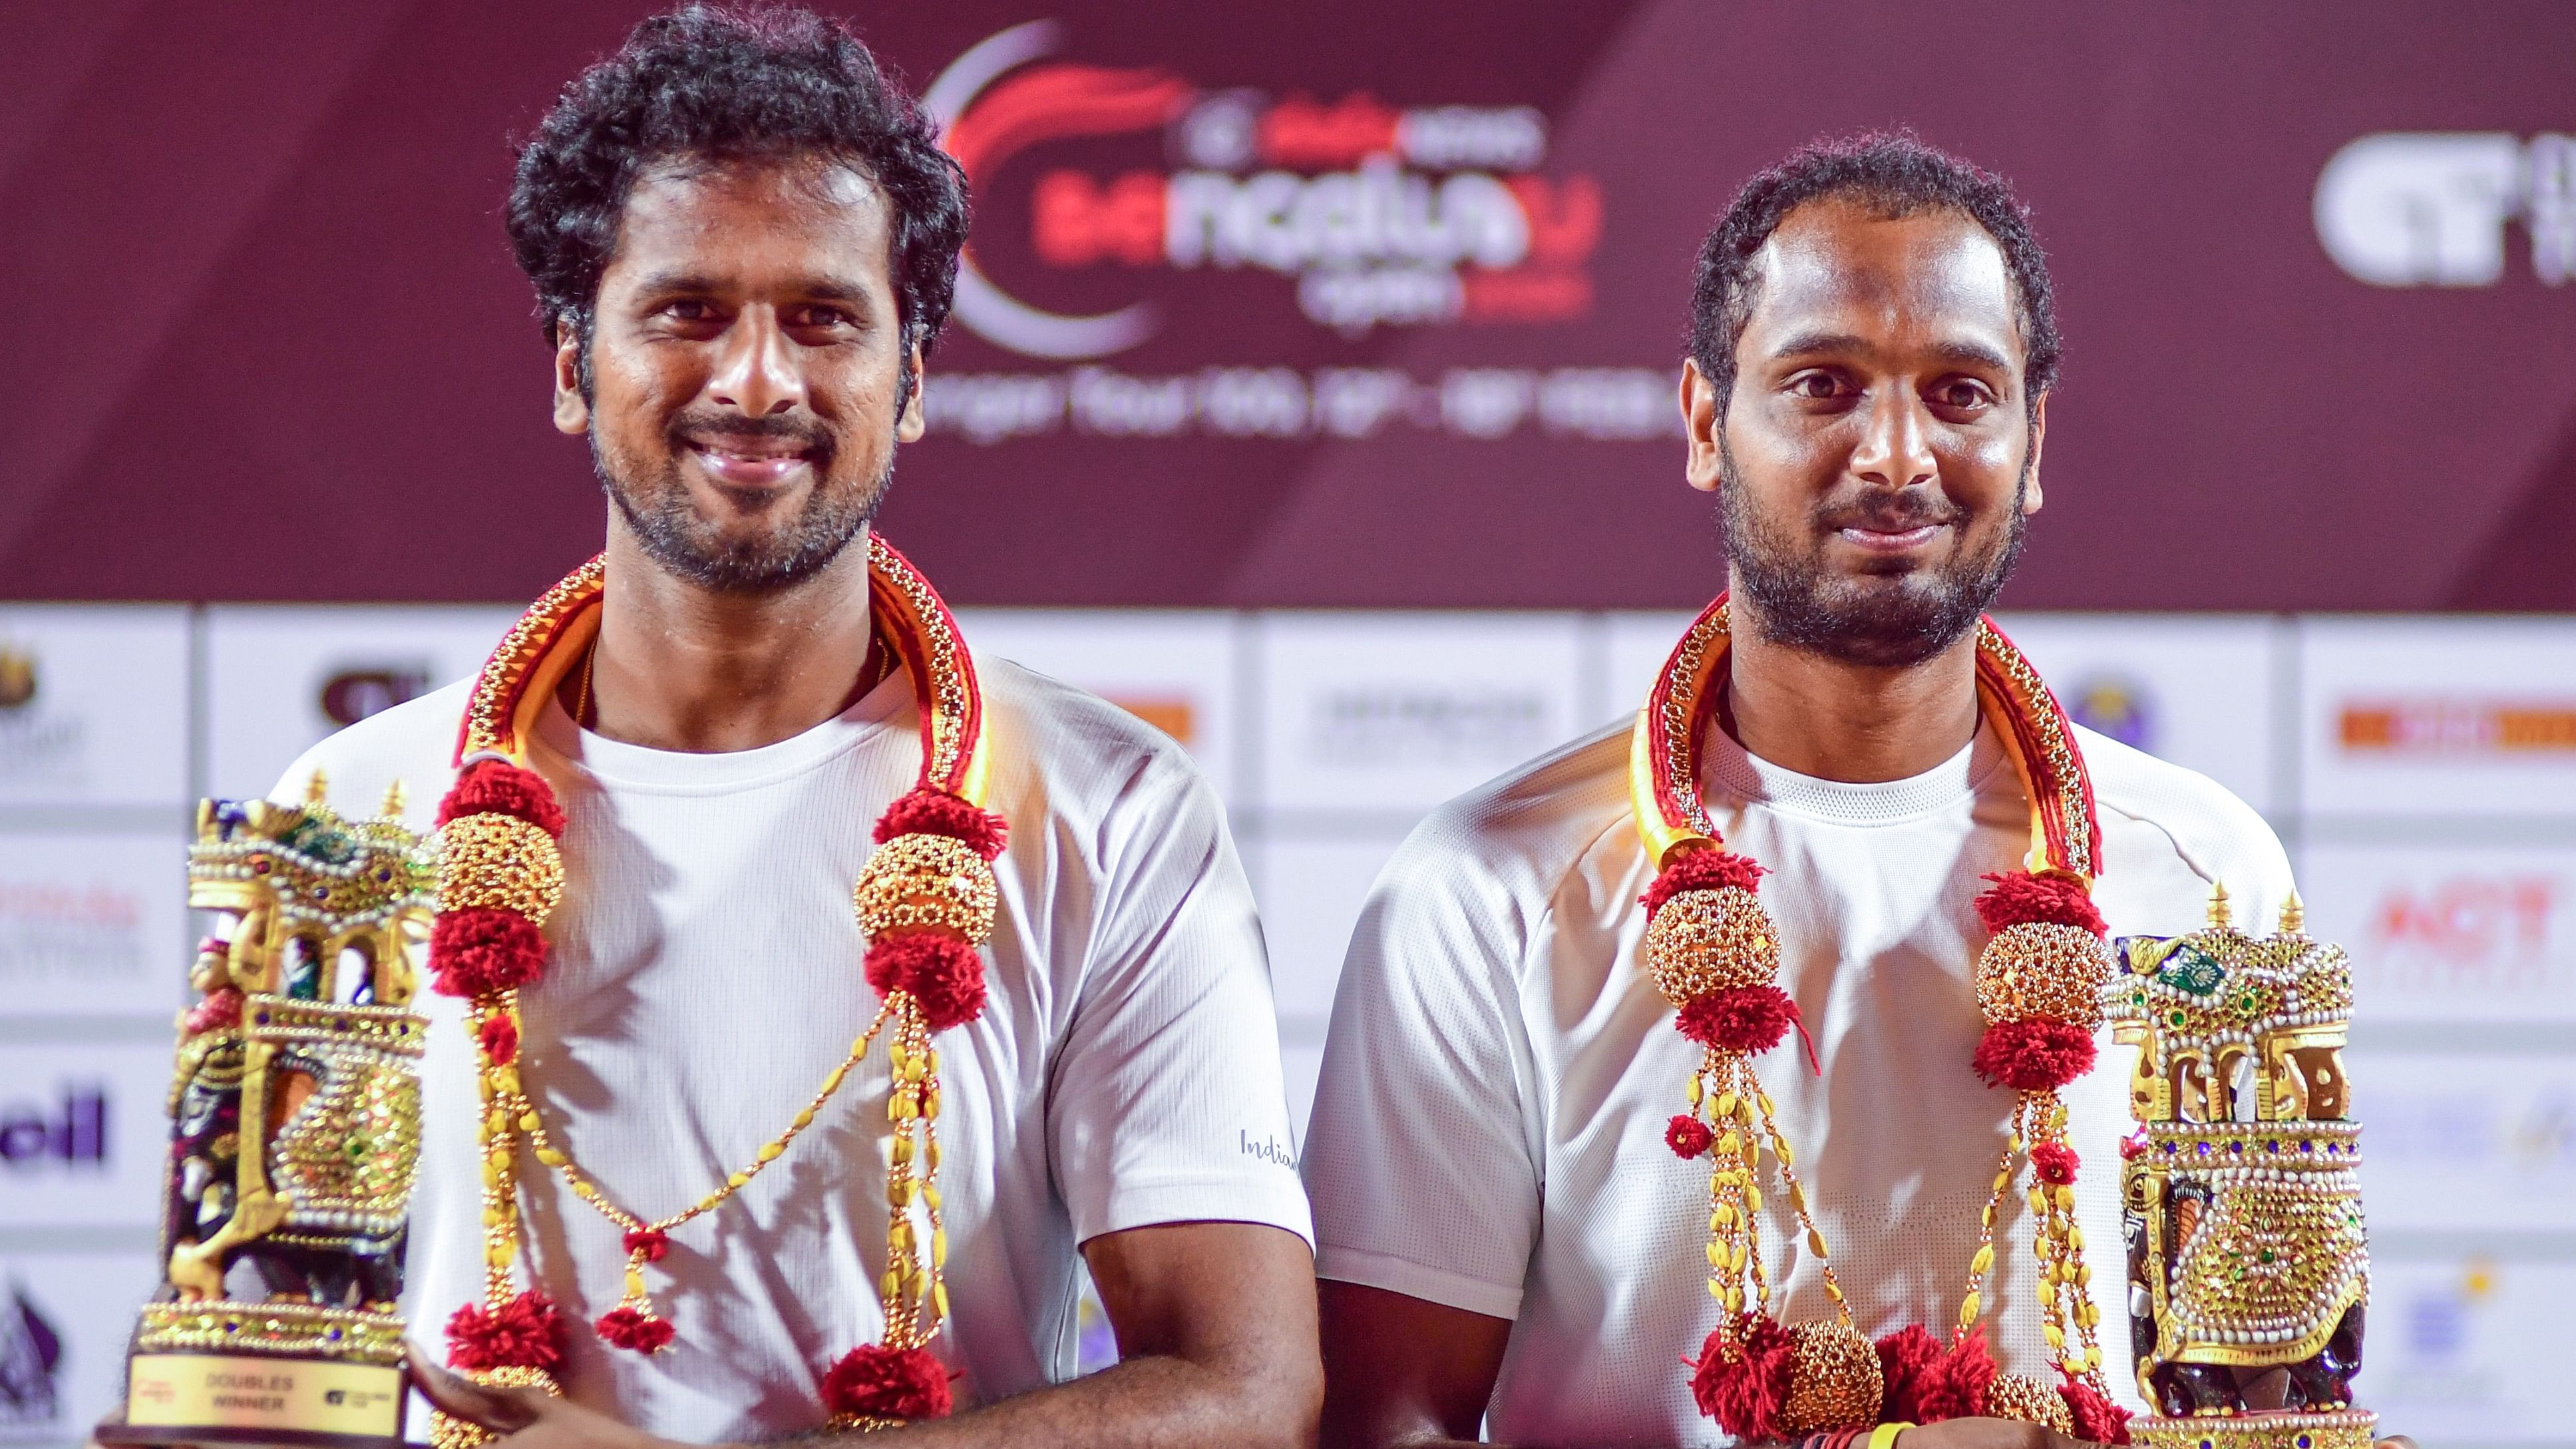 <div class="paragraphs"><p>Saketh Myneni (left) and Ramkumar Ramanathan pose with their trophies after winning the men’s doubles final of the Bengaluru Open at KSLTA on Saturday.</p></div>